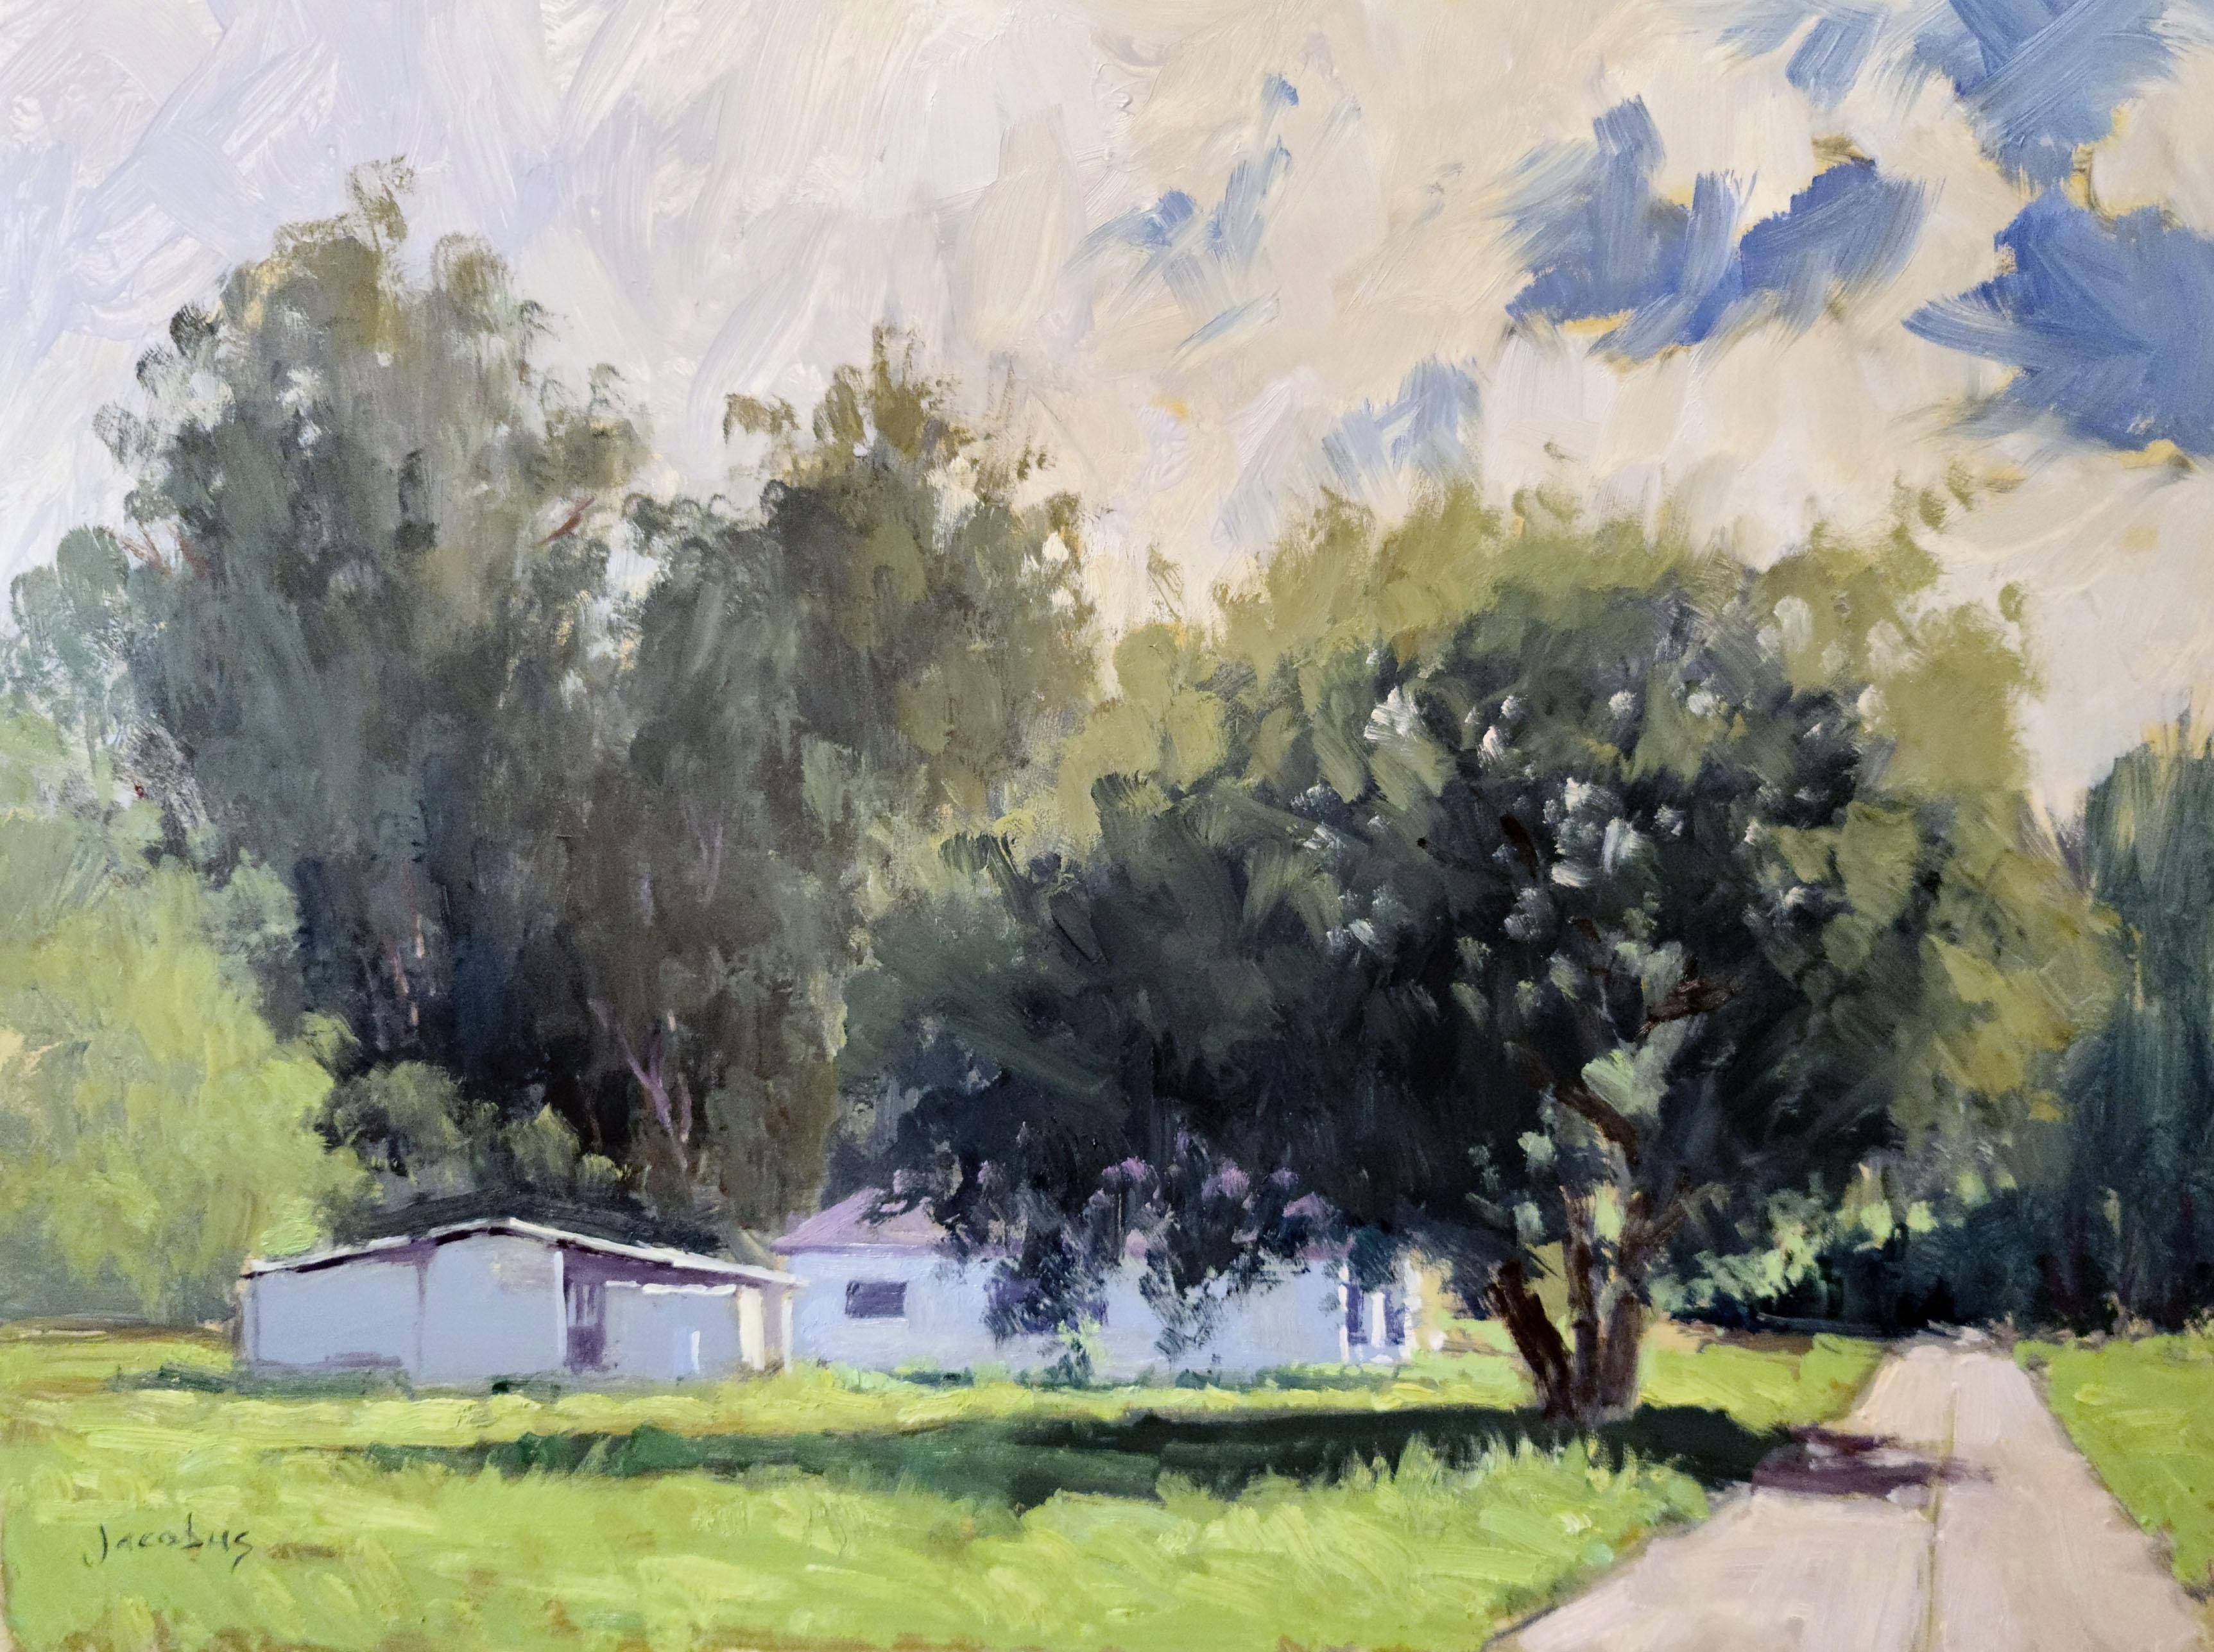 Jacobus Baas Landscape Painting - "La Salle Farm House" California Plein Air Painting with Green, Blues and White